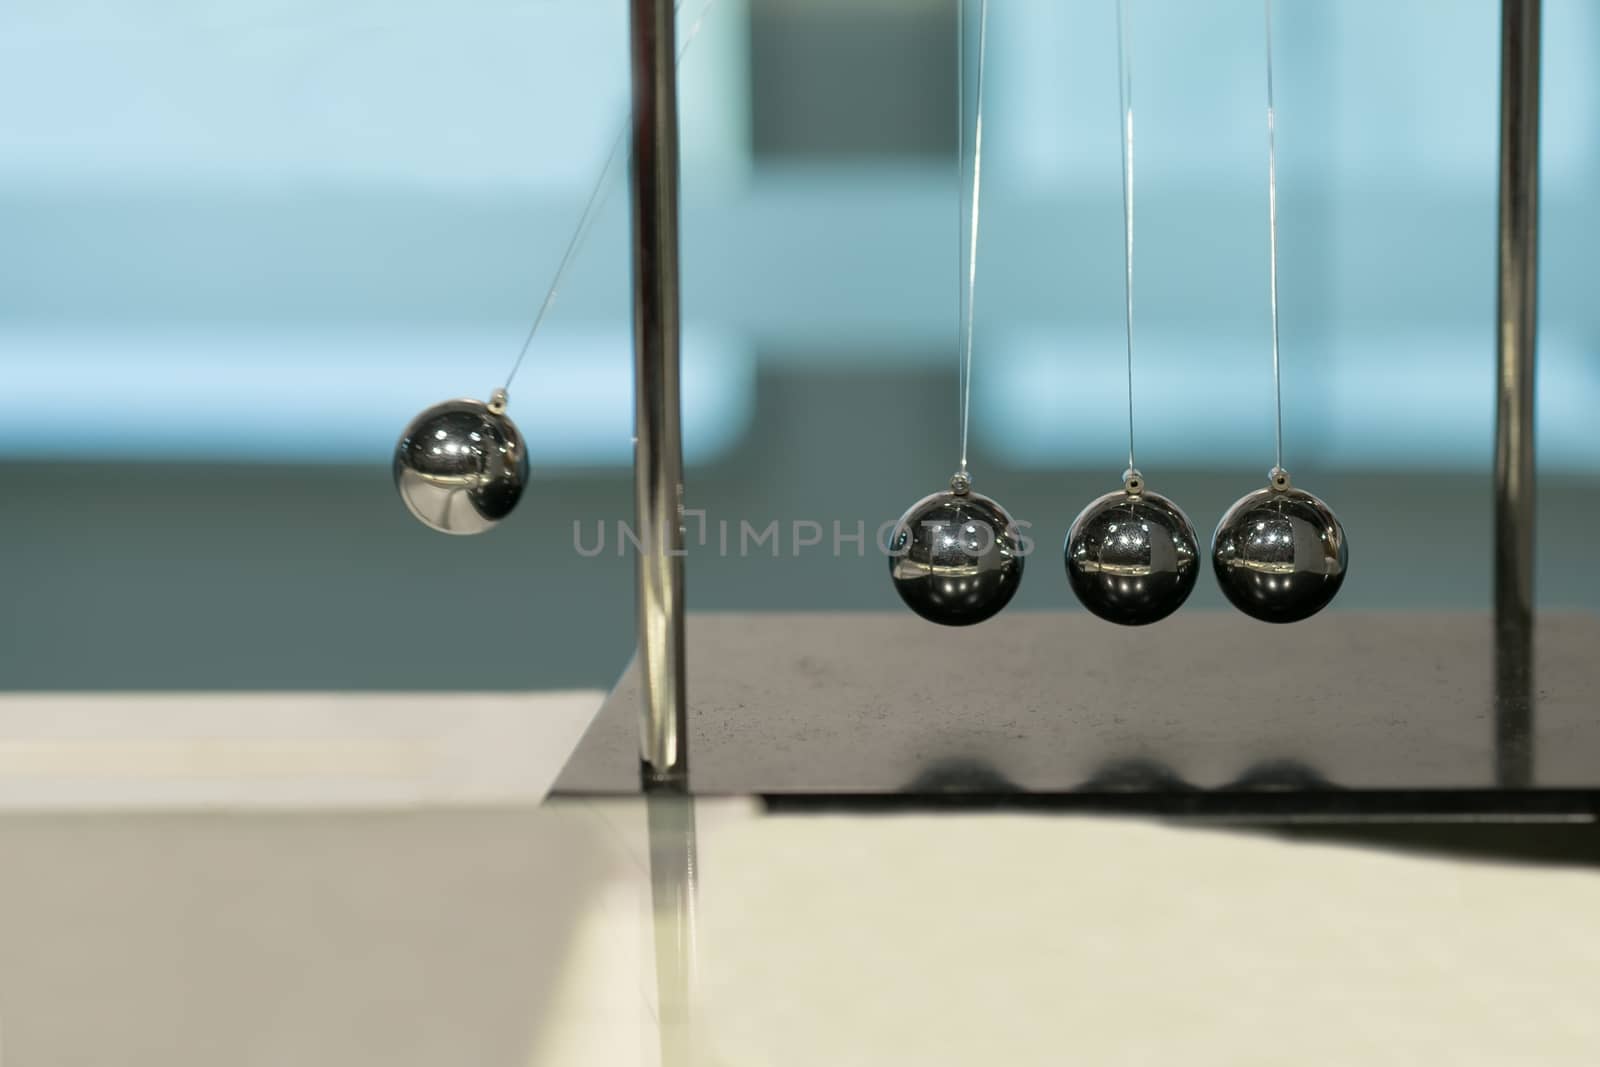 Balancing Balls Newton's Cradle on blurred backgrounds by psodaz